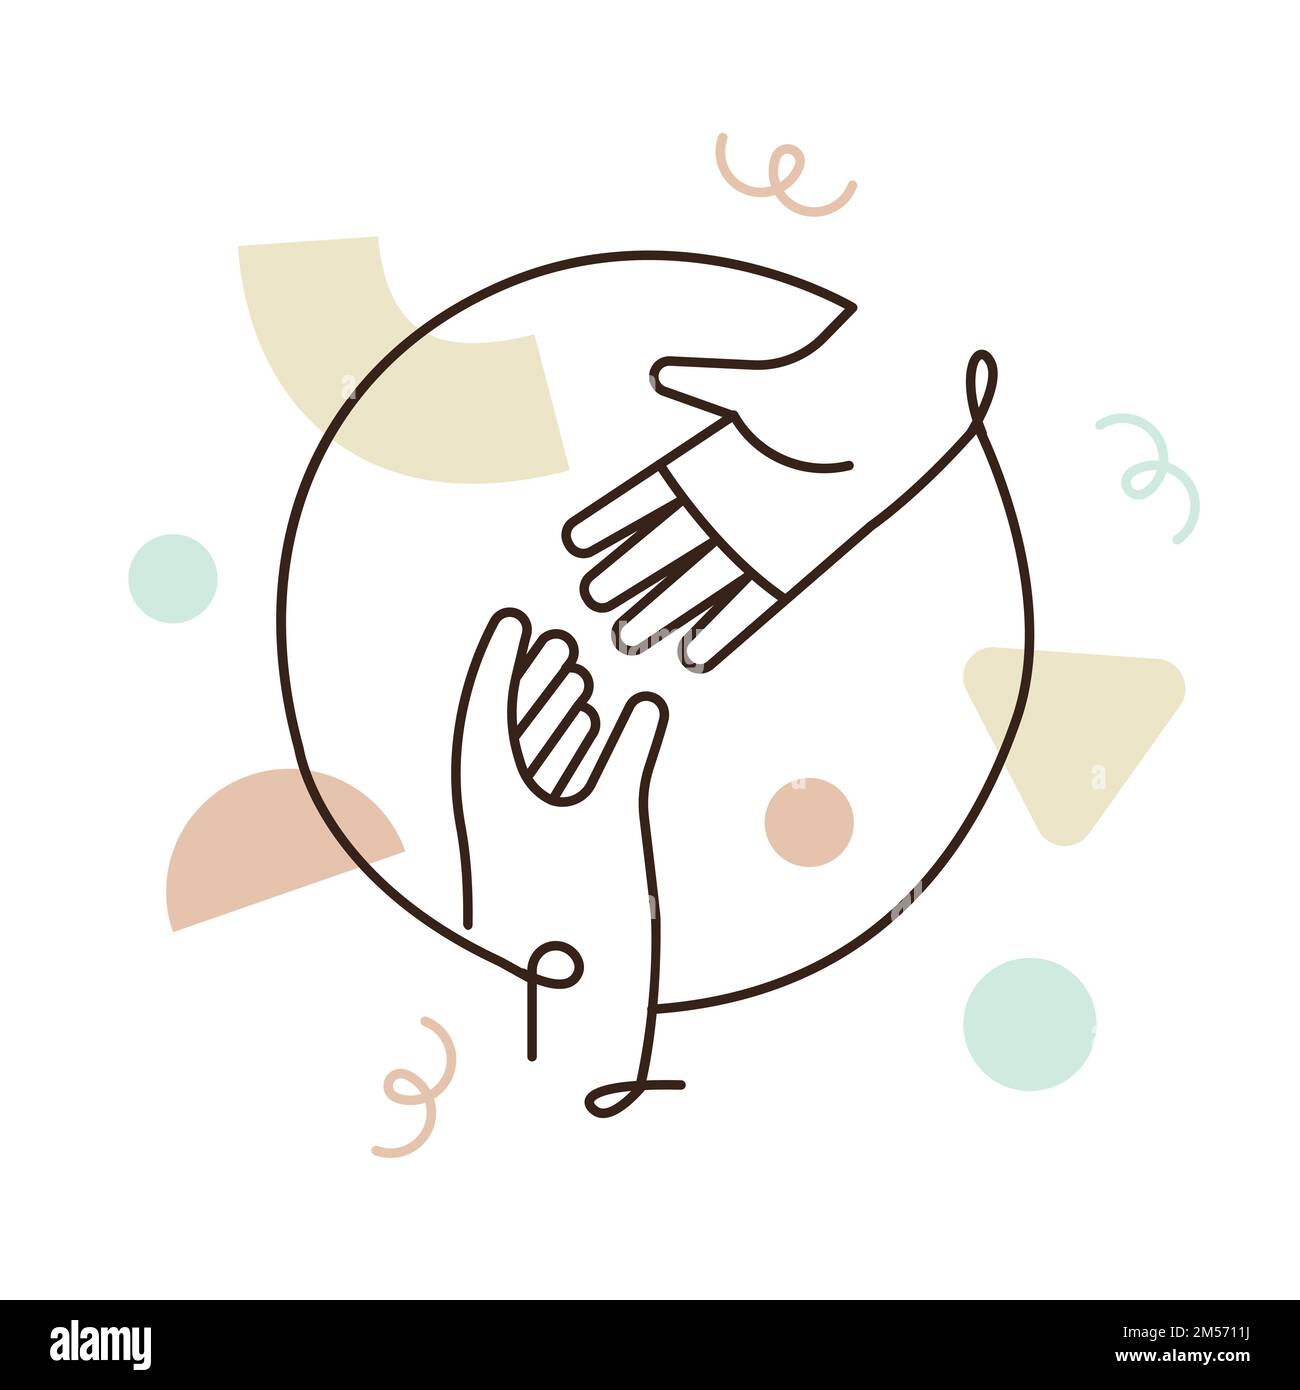 People hands reaching out for each other. Business teamwork idea concept or social help design. Modern flat outline style corporate cartoon. Stock Vector